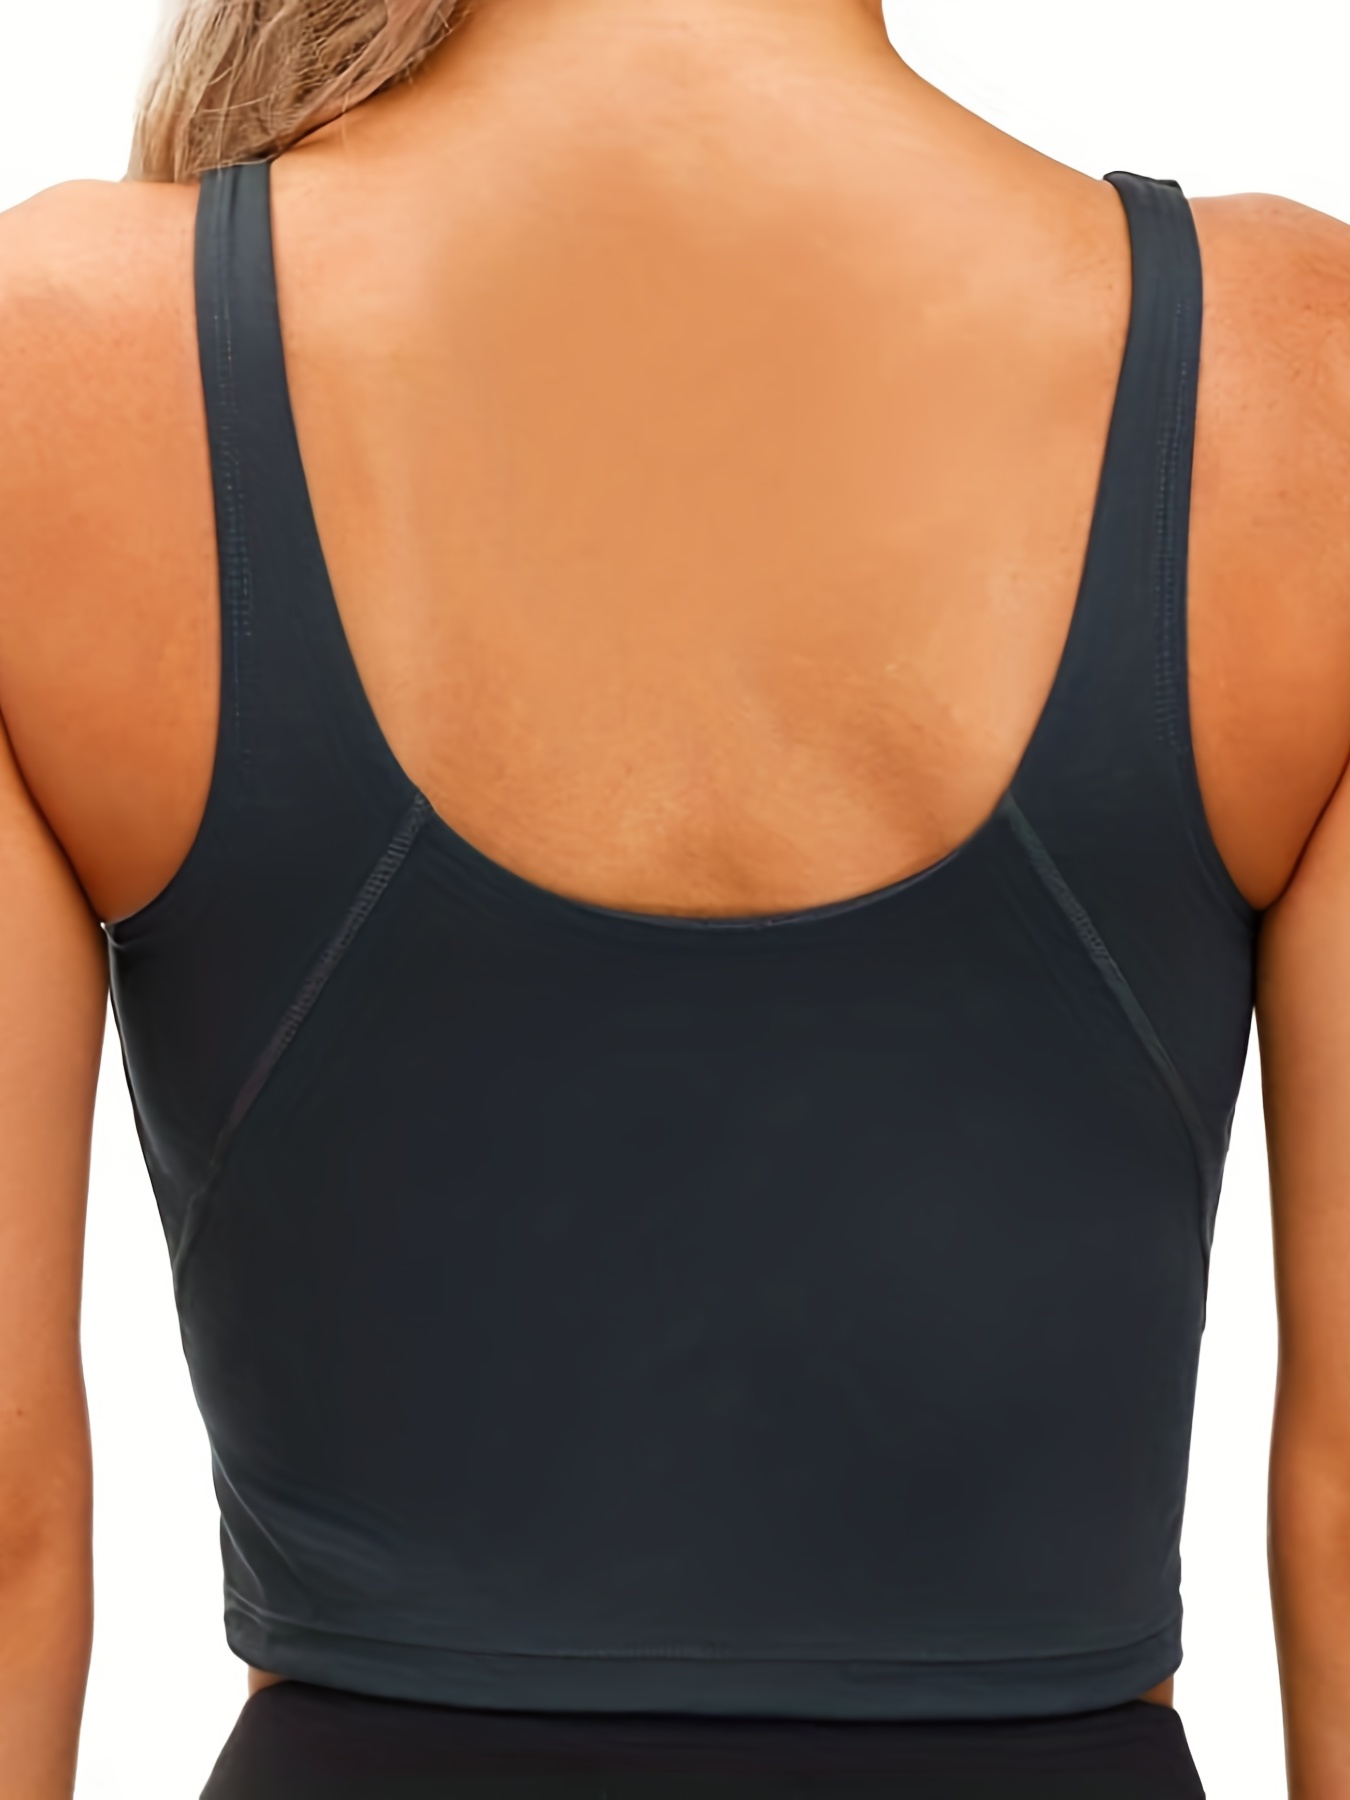 BATHRINS Strappy Sports Bras for Women Padded Wirefree Medium Support  Supportive Longline Workout Yoga Bra Black at  Women's Clothing store